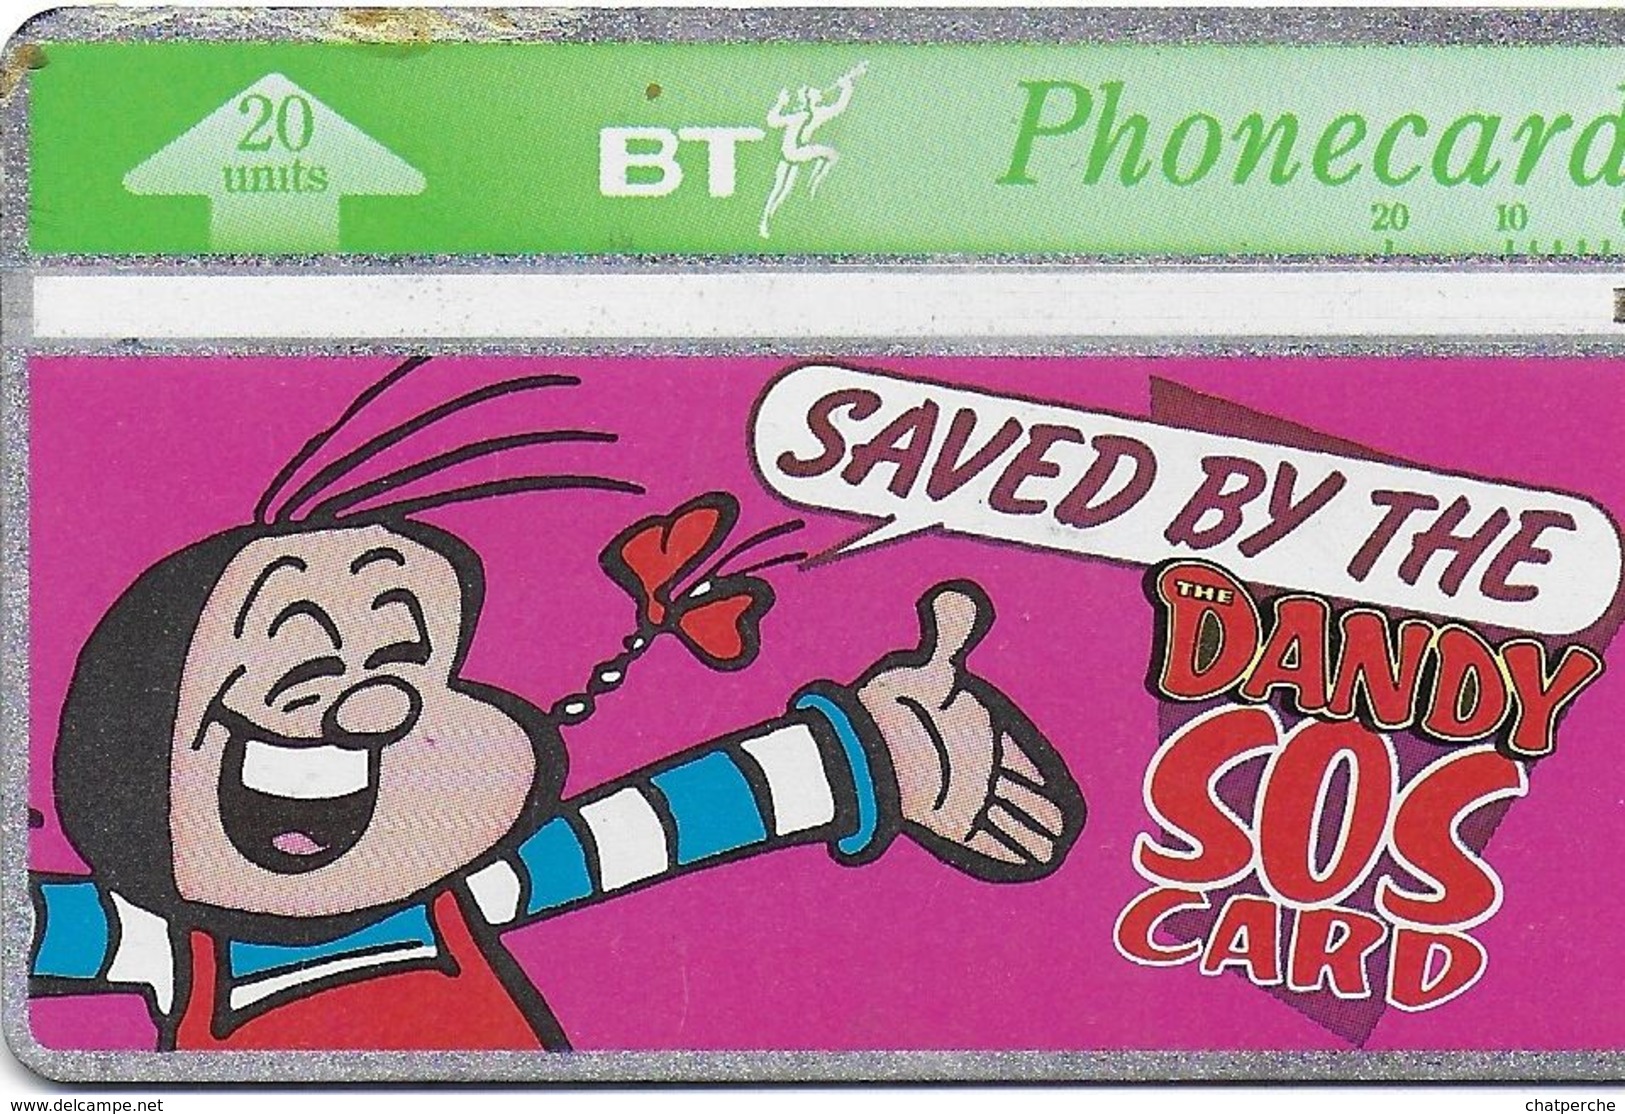 TÉLÉCARTE PHONECARD ROYAUME-UNI  20 UNITES SAVE BY THE DANDY SOS CARD - Collections